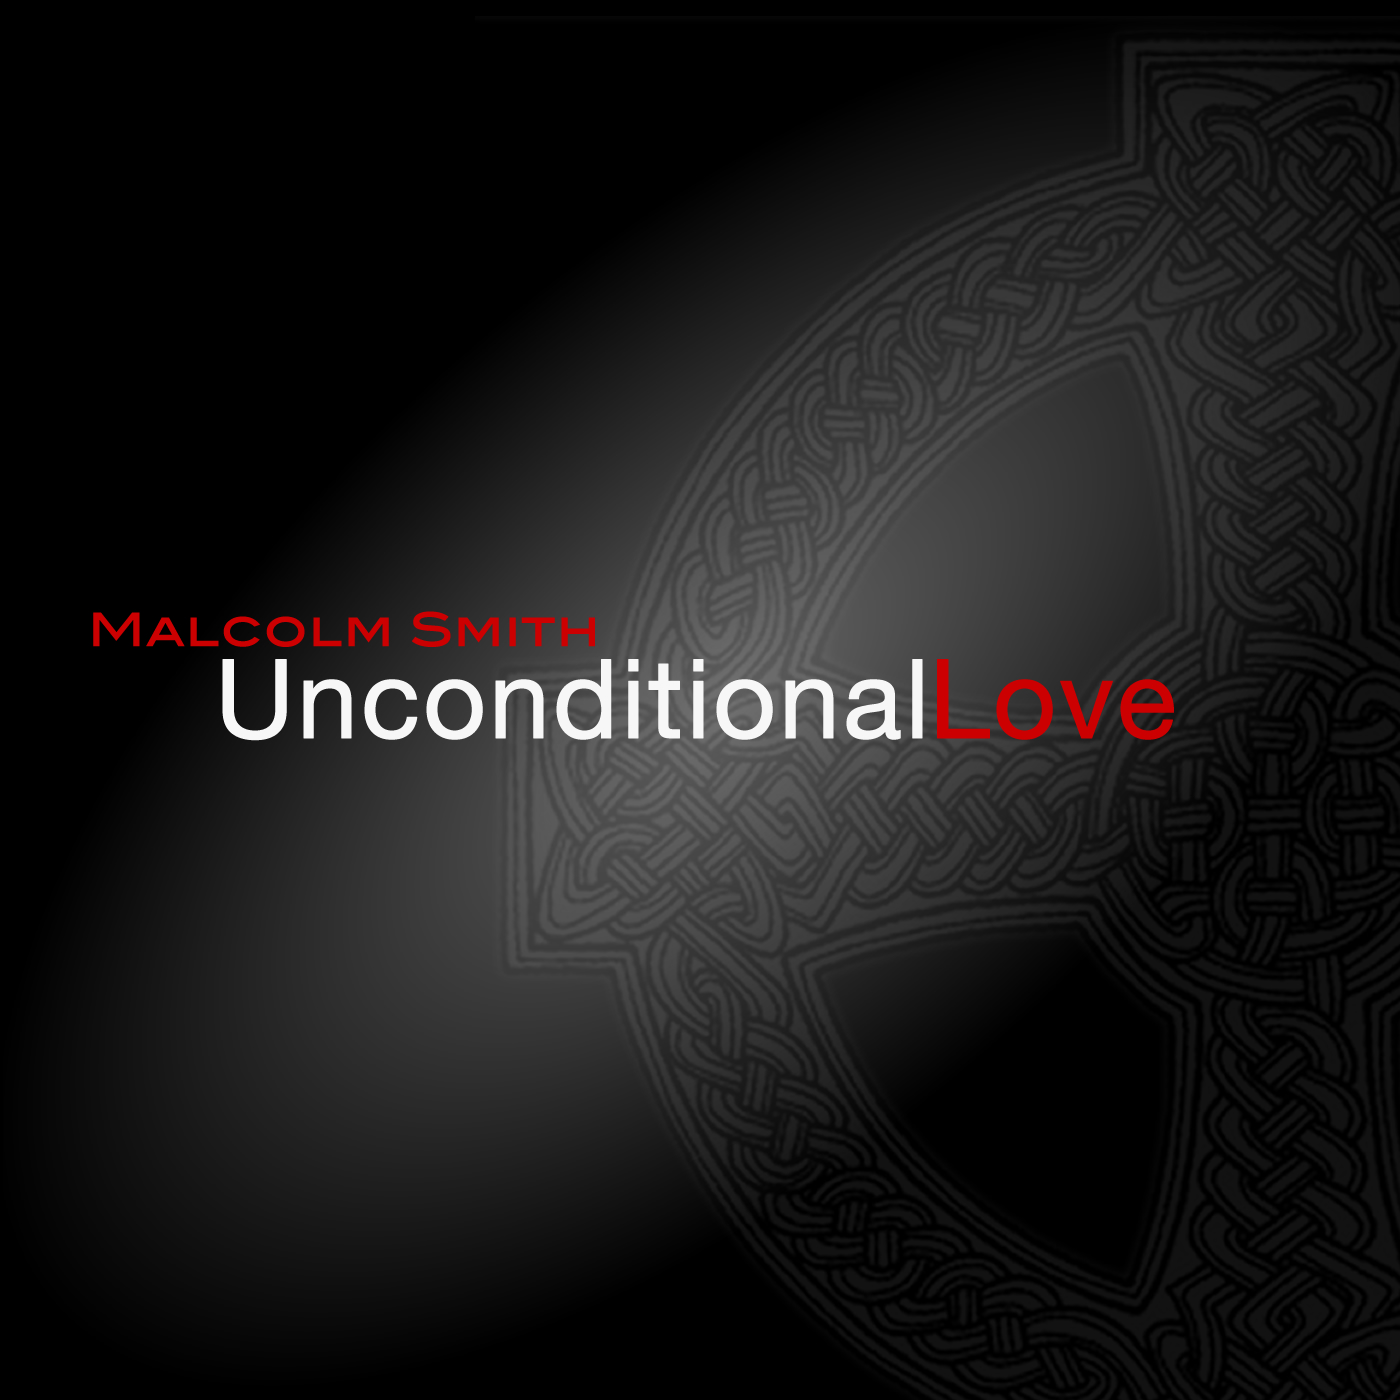 Unconditional Love International - The Ministry of Malcolm Smith